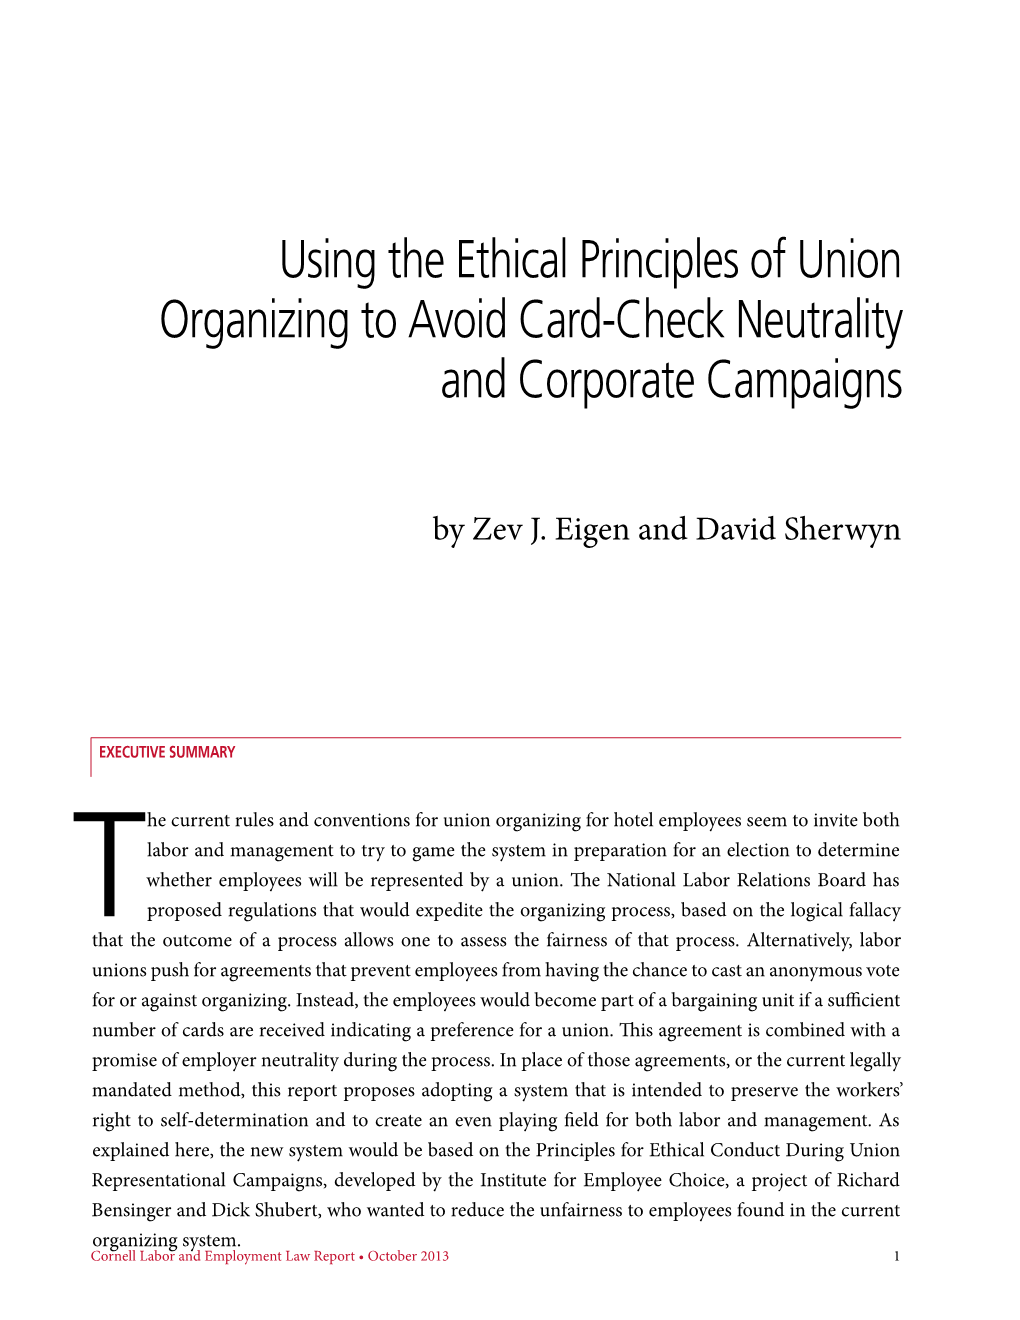 Using the Ethical Principles of Union Organizing to Avoid Card-Check Neutrality and Corporate Campaigns